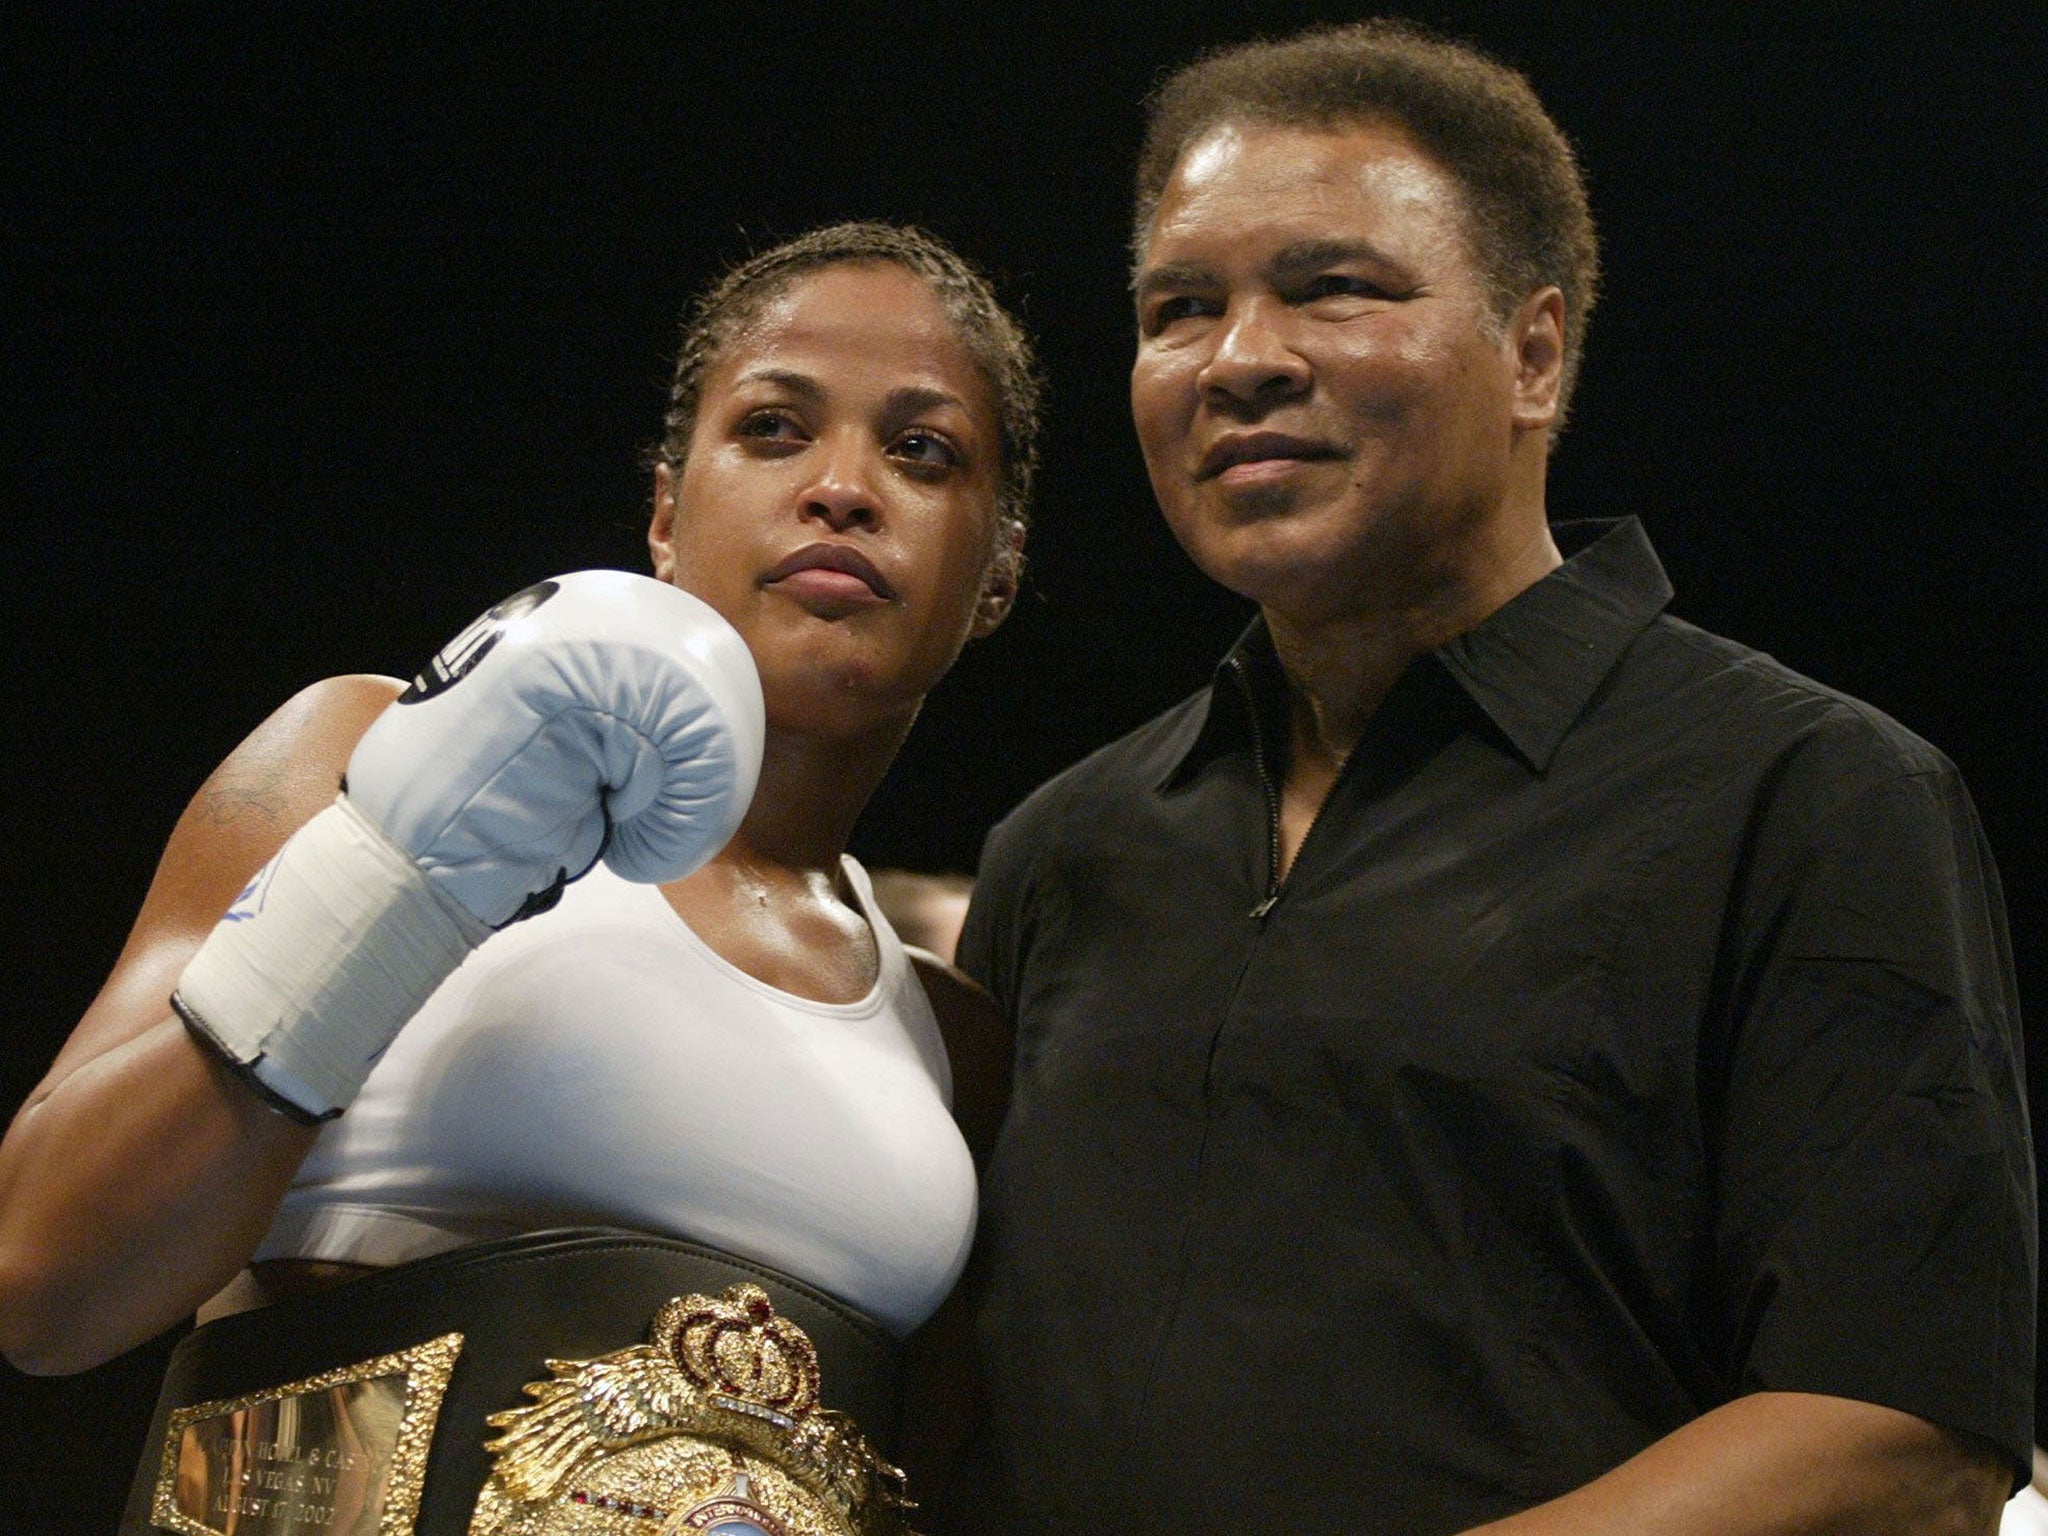 Muhammad Ali with his daughter Laila Ali after she defeated Suzy Taylor in two rounds at the Aladdin Casino in Las Vegas in 2002